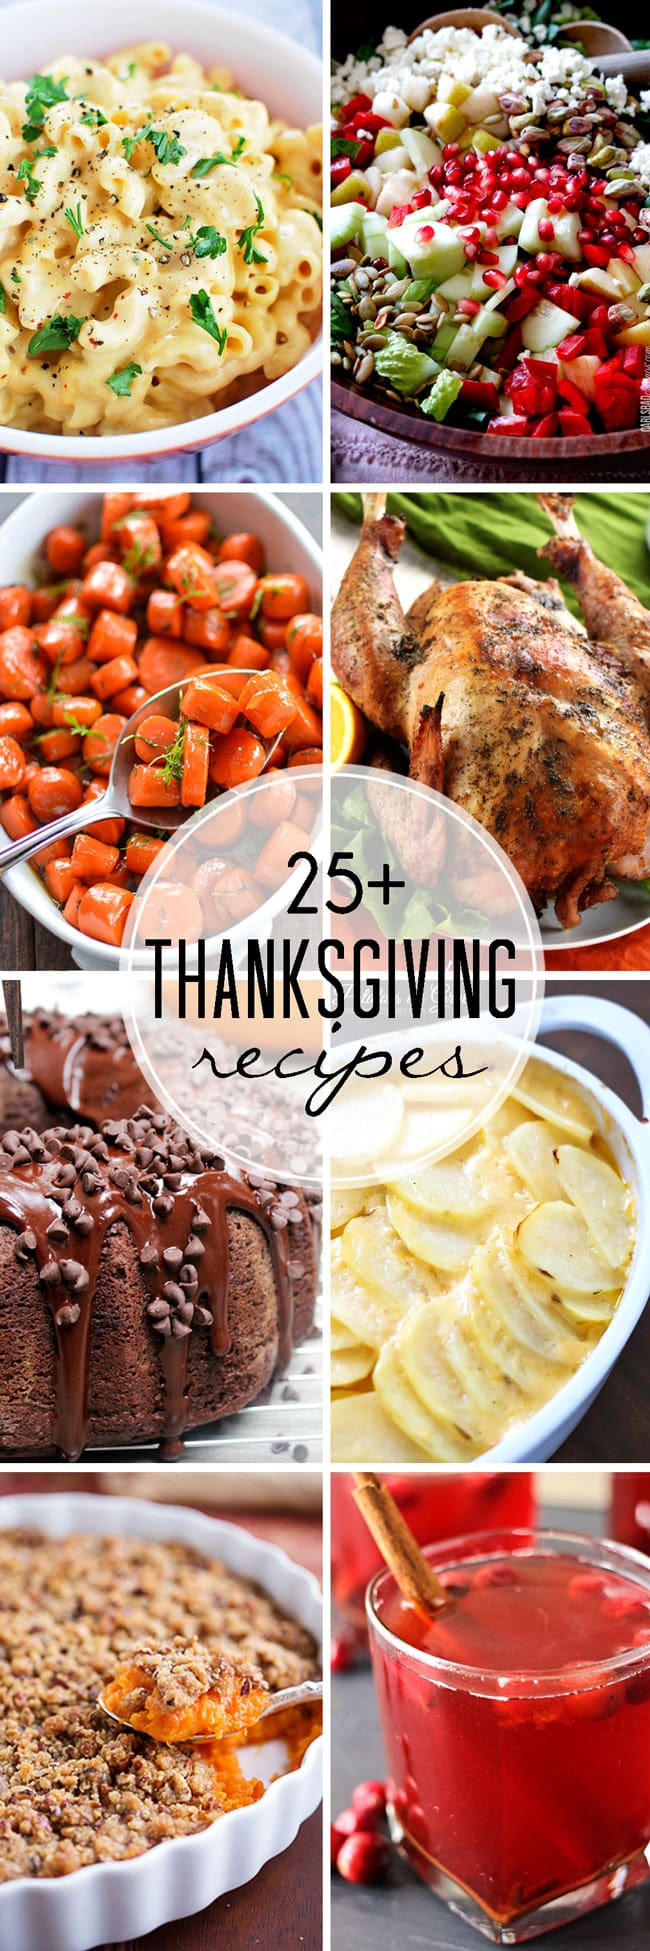 Thanksgiving Turkey Recipes
 25 Thanksgiving Recipes That Skinny Chick Can Bake